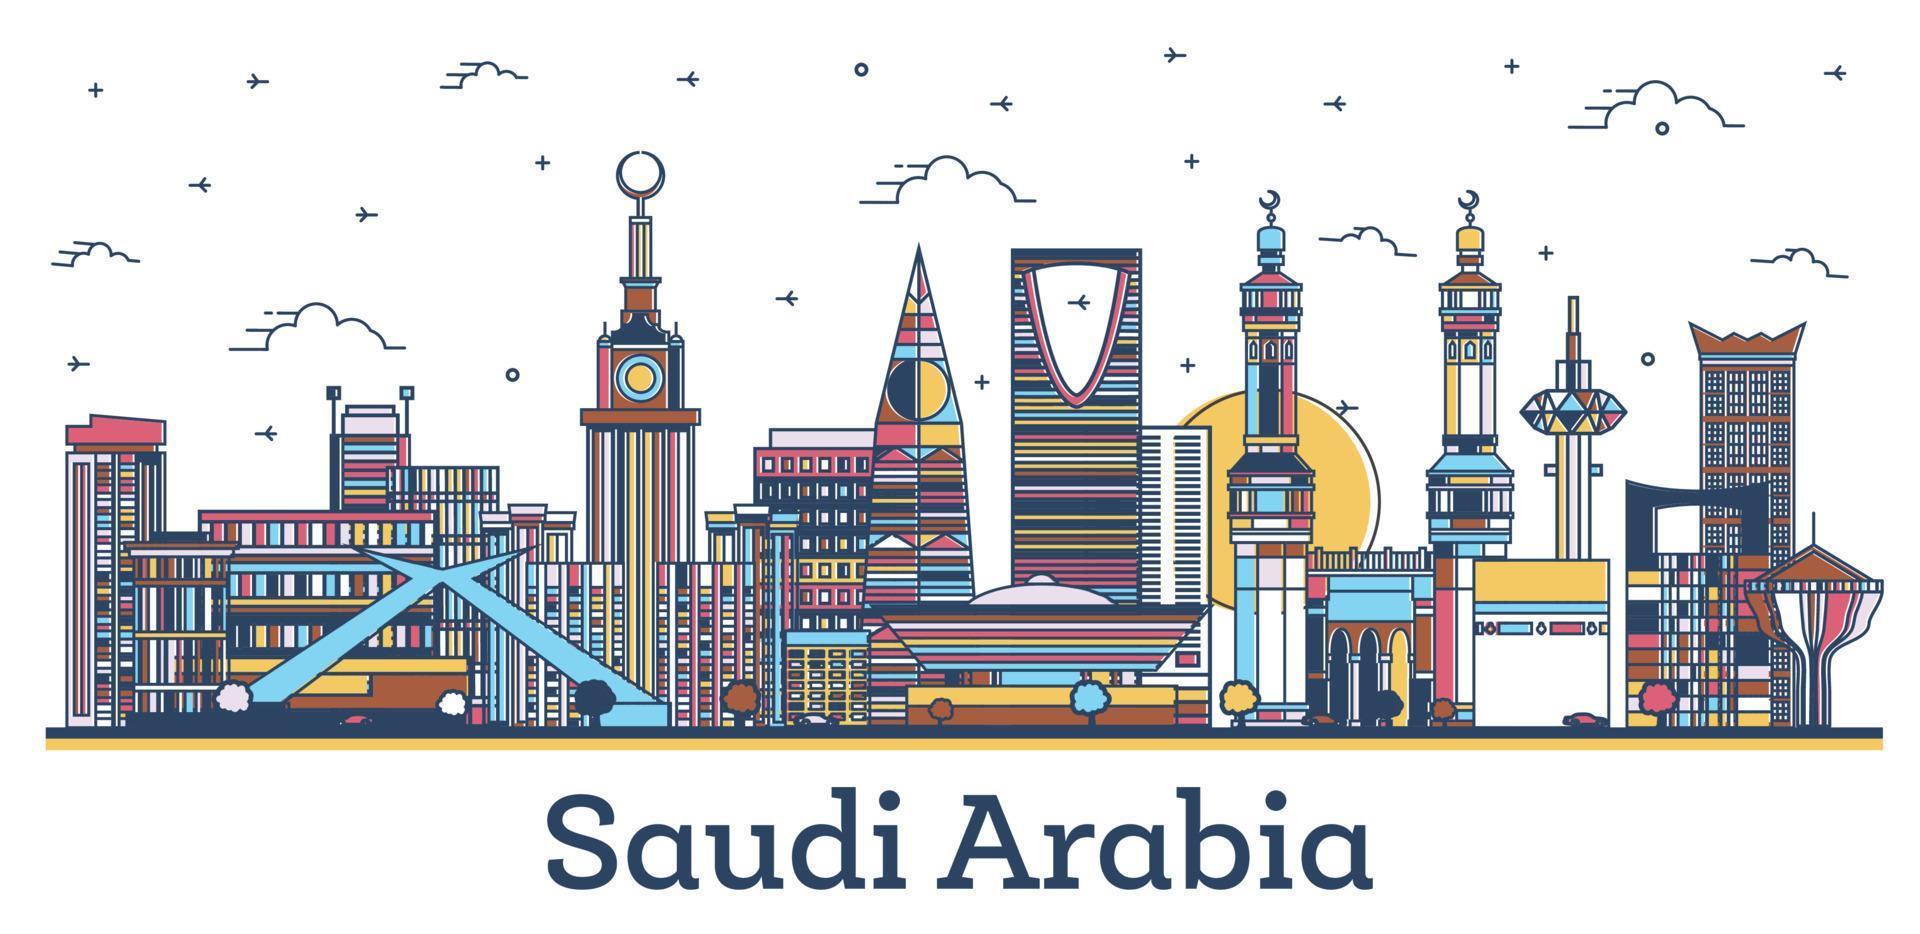 Outline Saudi Arabia City Skyline with Colored Historic and Modern Buildings Isolated on White. vector